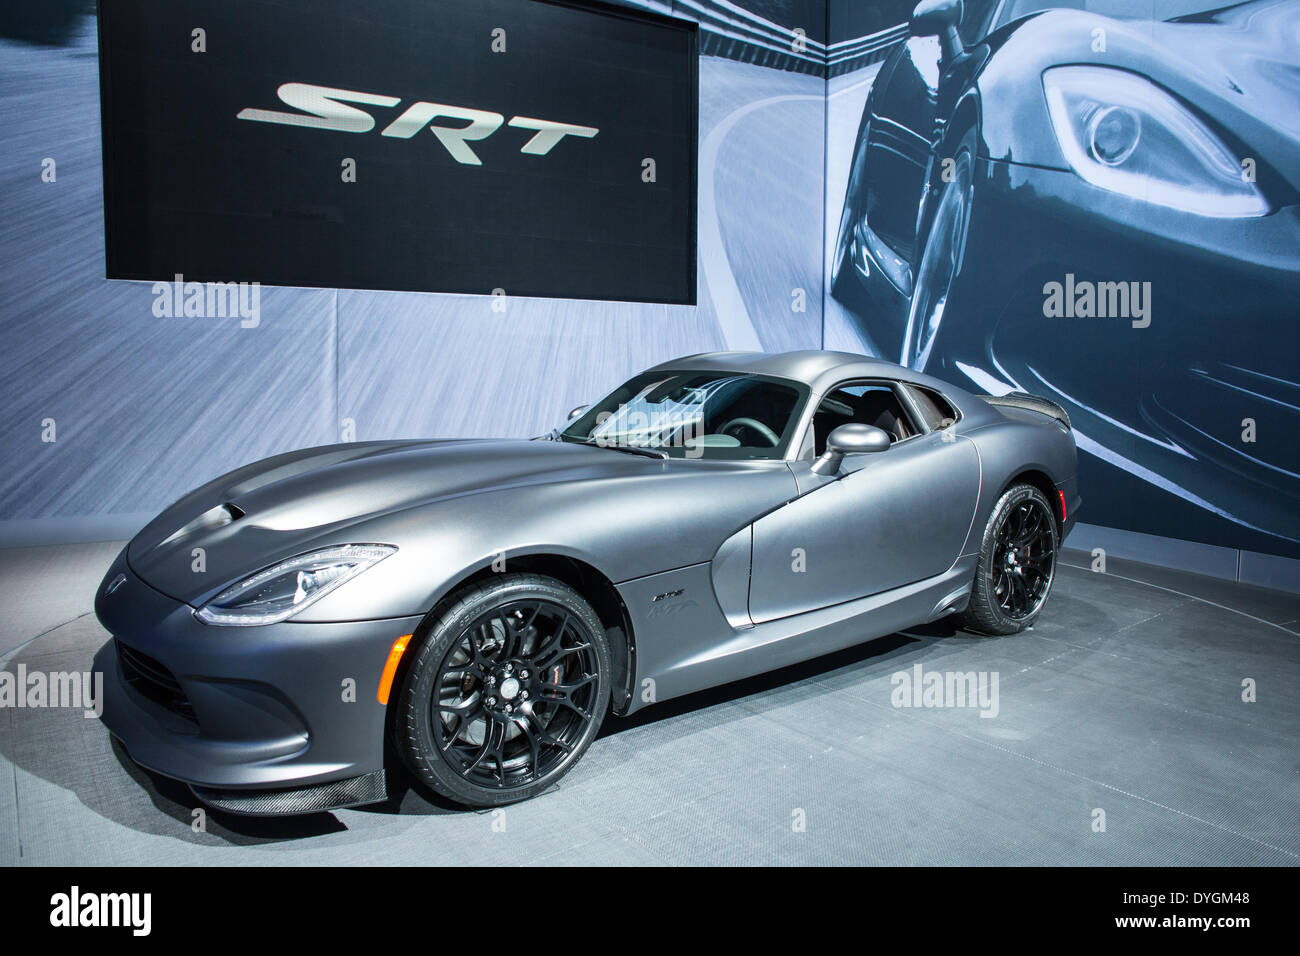 New York, NY - 16 April 2014. SRT—Street and Racing Technology—exhibits its customized 2014 Dodge Viper GTS. The car is one of only 10 in its Anodized Carbon Edition. Credit:  Ed Lefkowicz/Alamy Live News Stock Photo